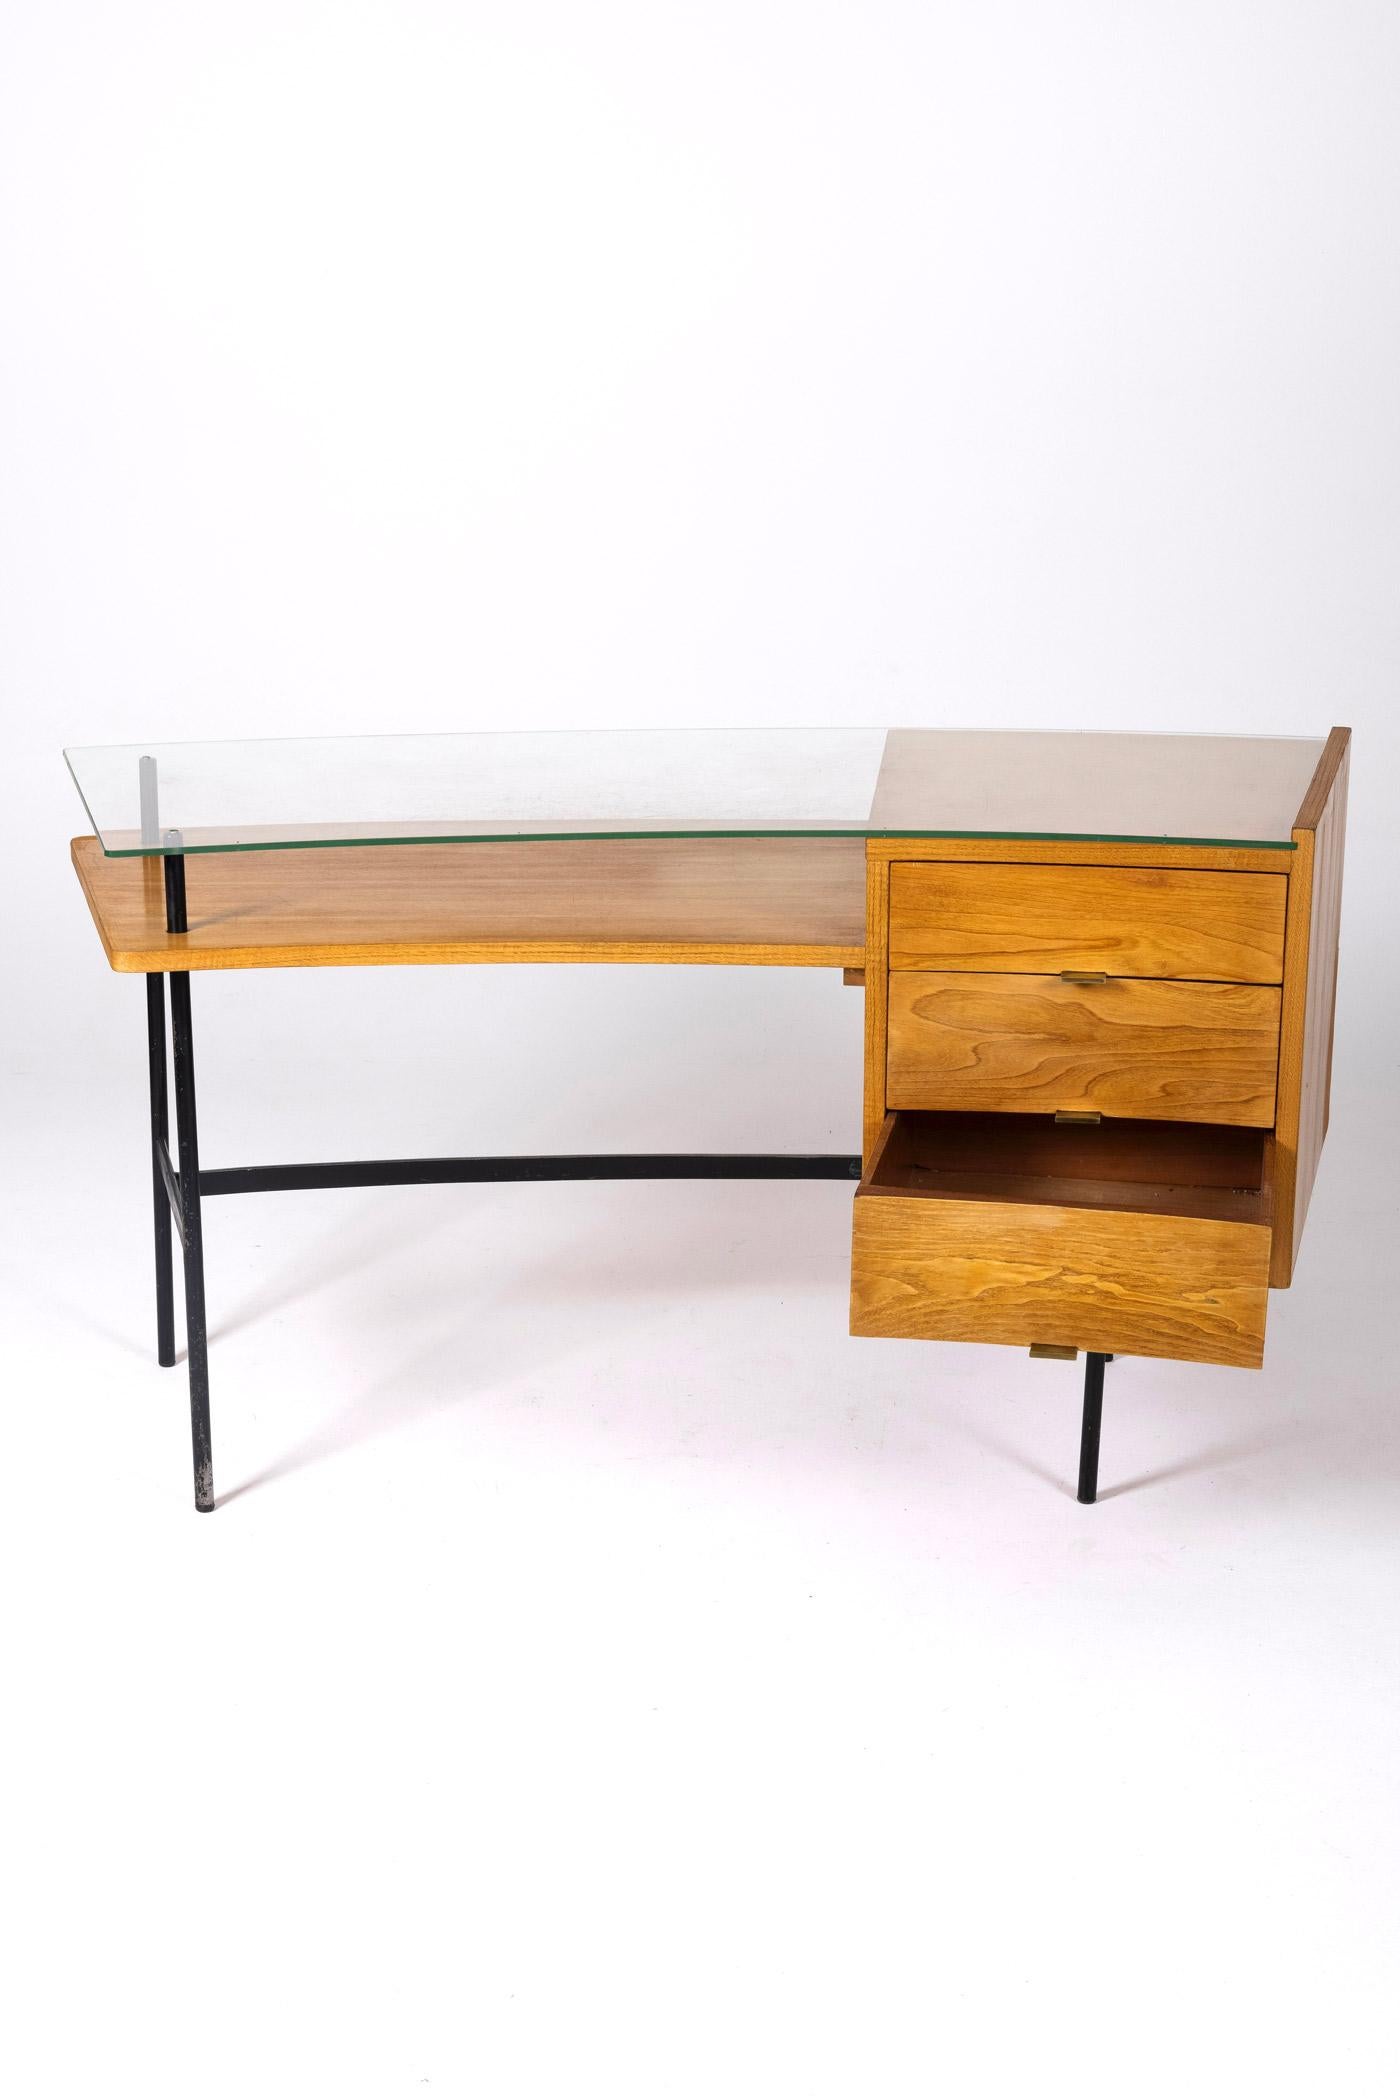 20th Century Wood and glass desk by Jean René Picard, 1960s